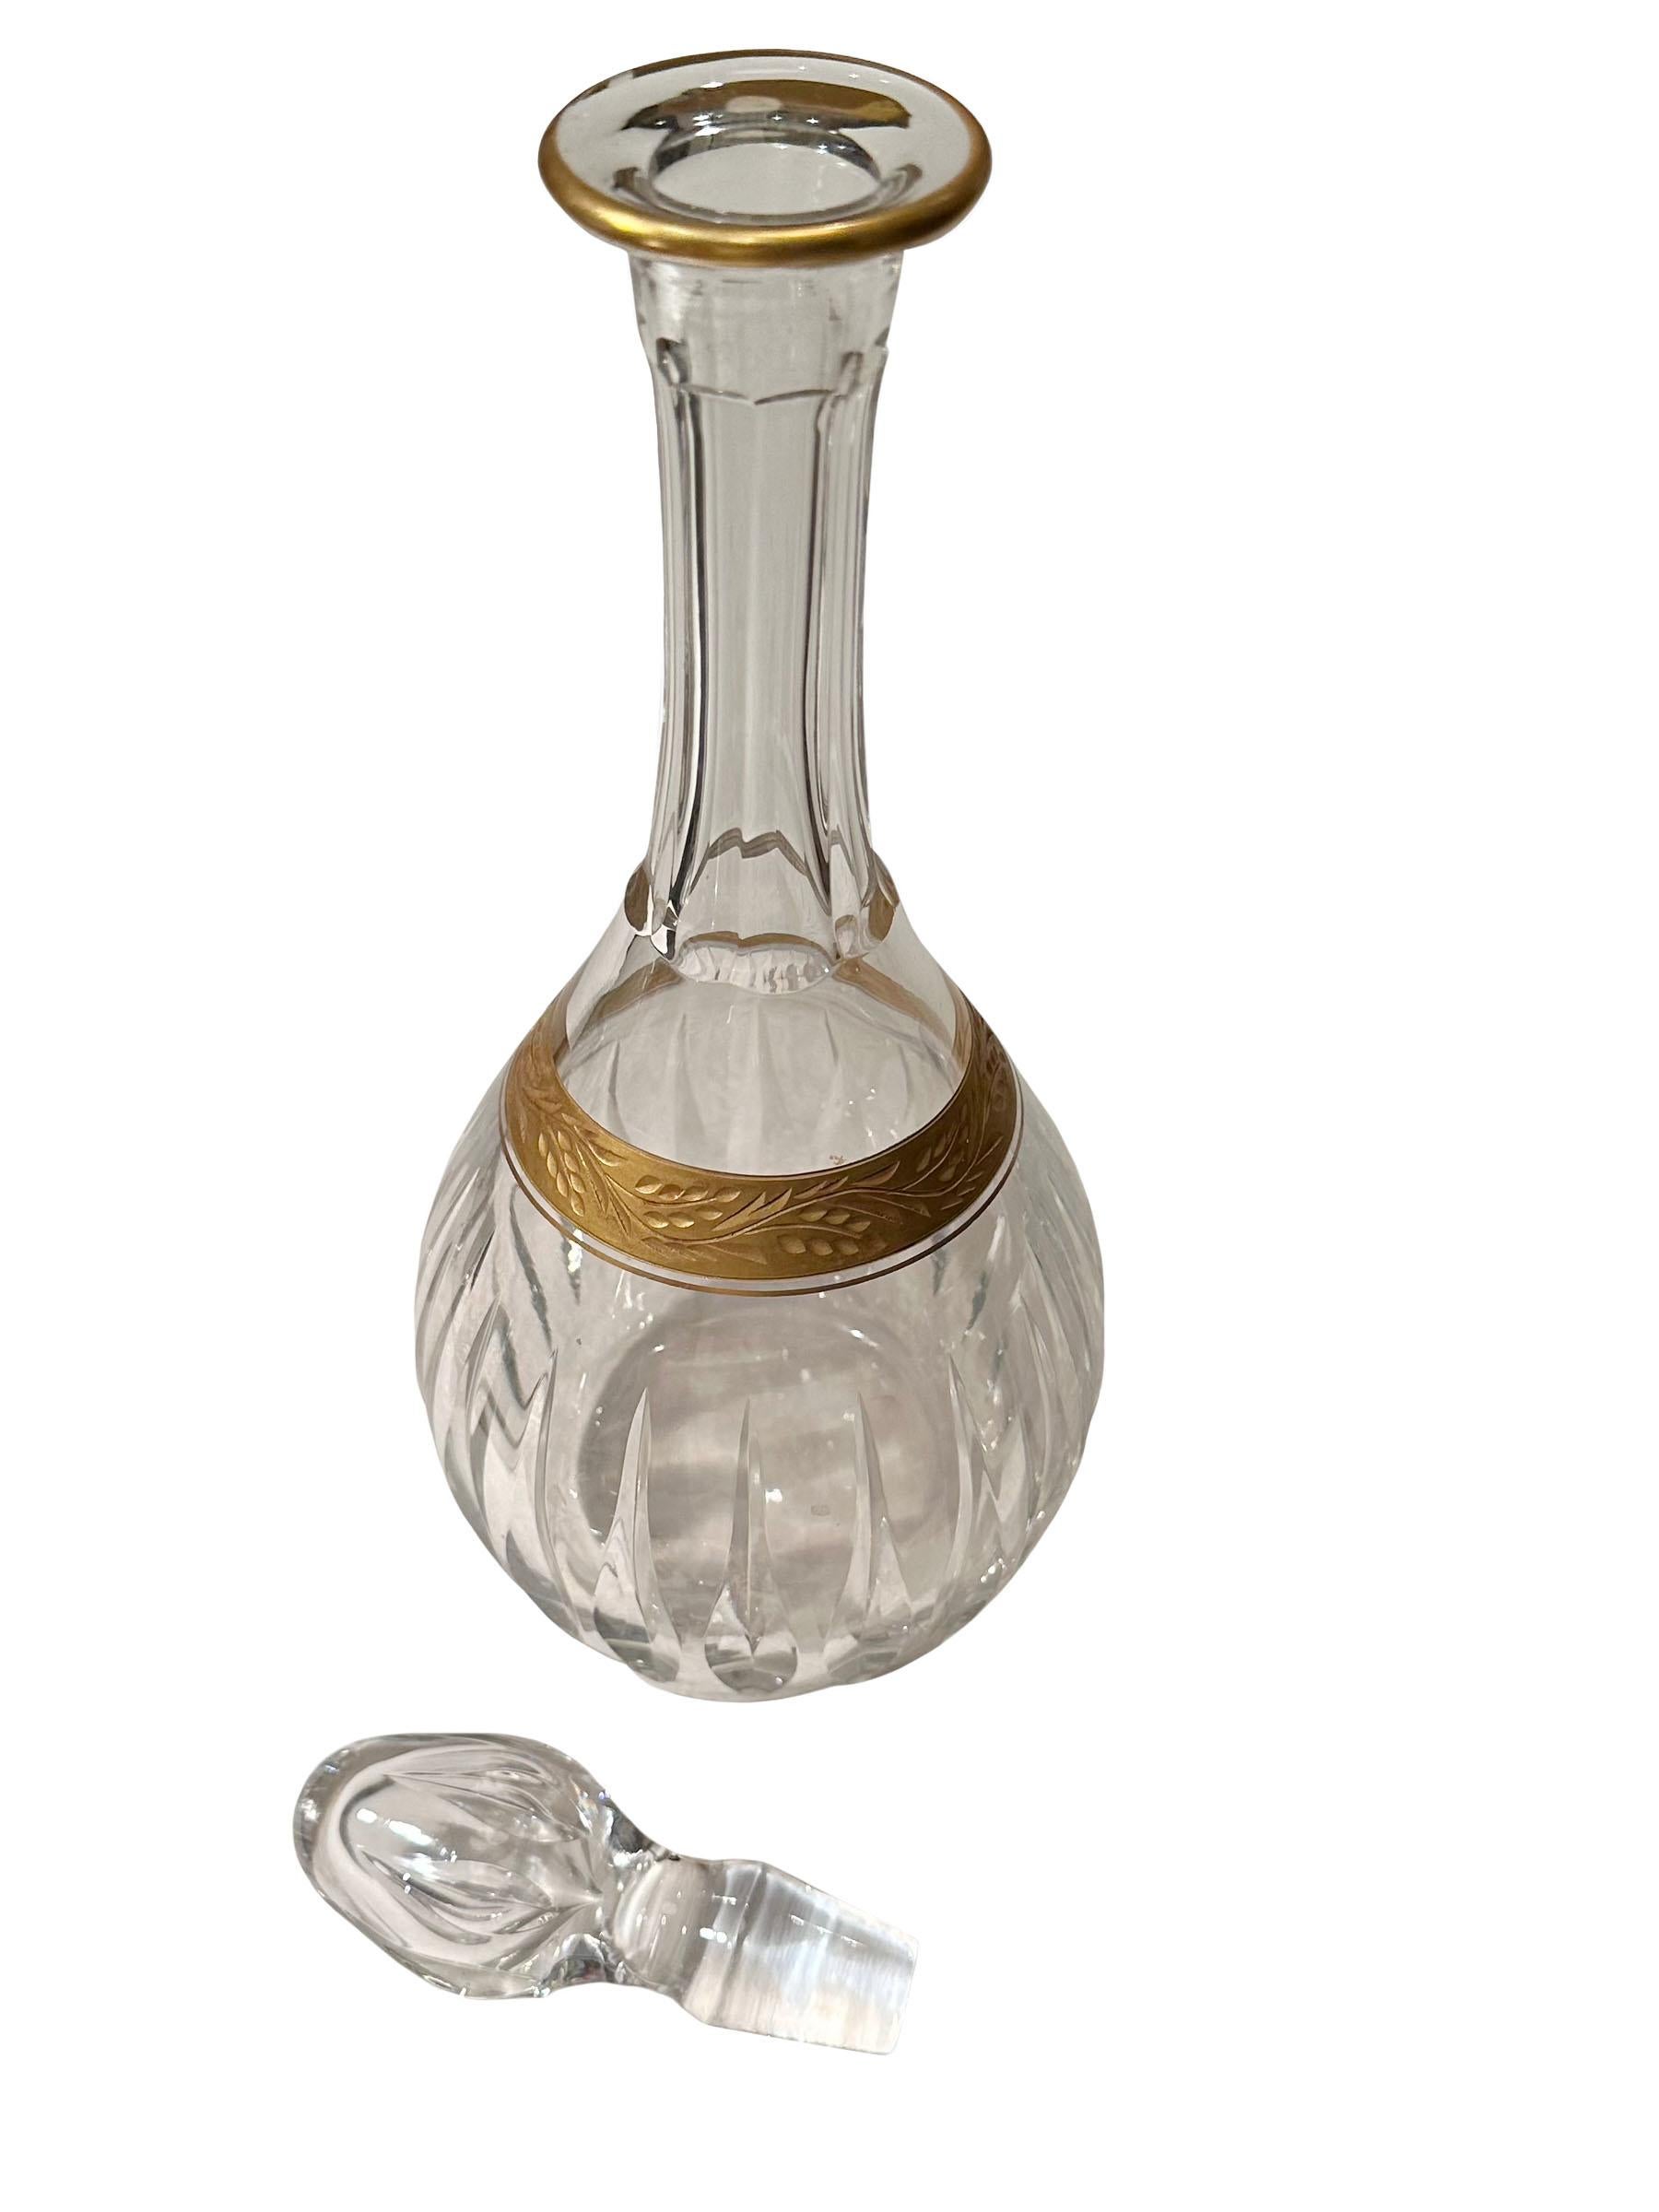 A Baccarat style turn of the century decanter. France, circa 1910.  Beautiful crystal with gold and with its stopper. An elegant bar accessory. 